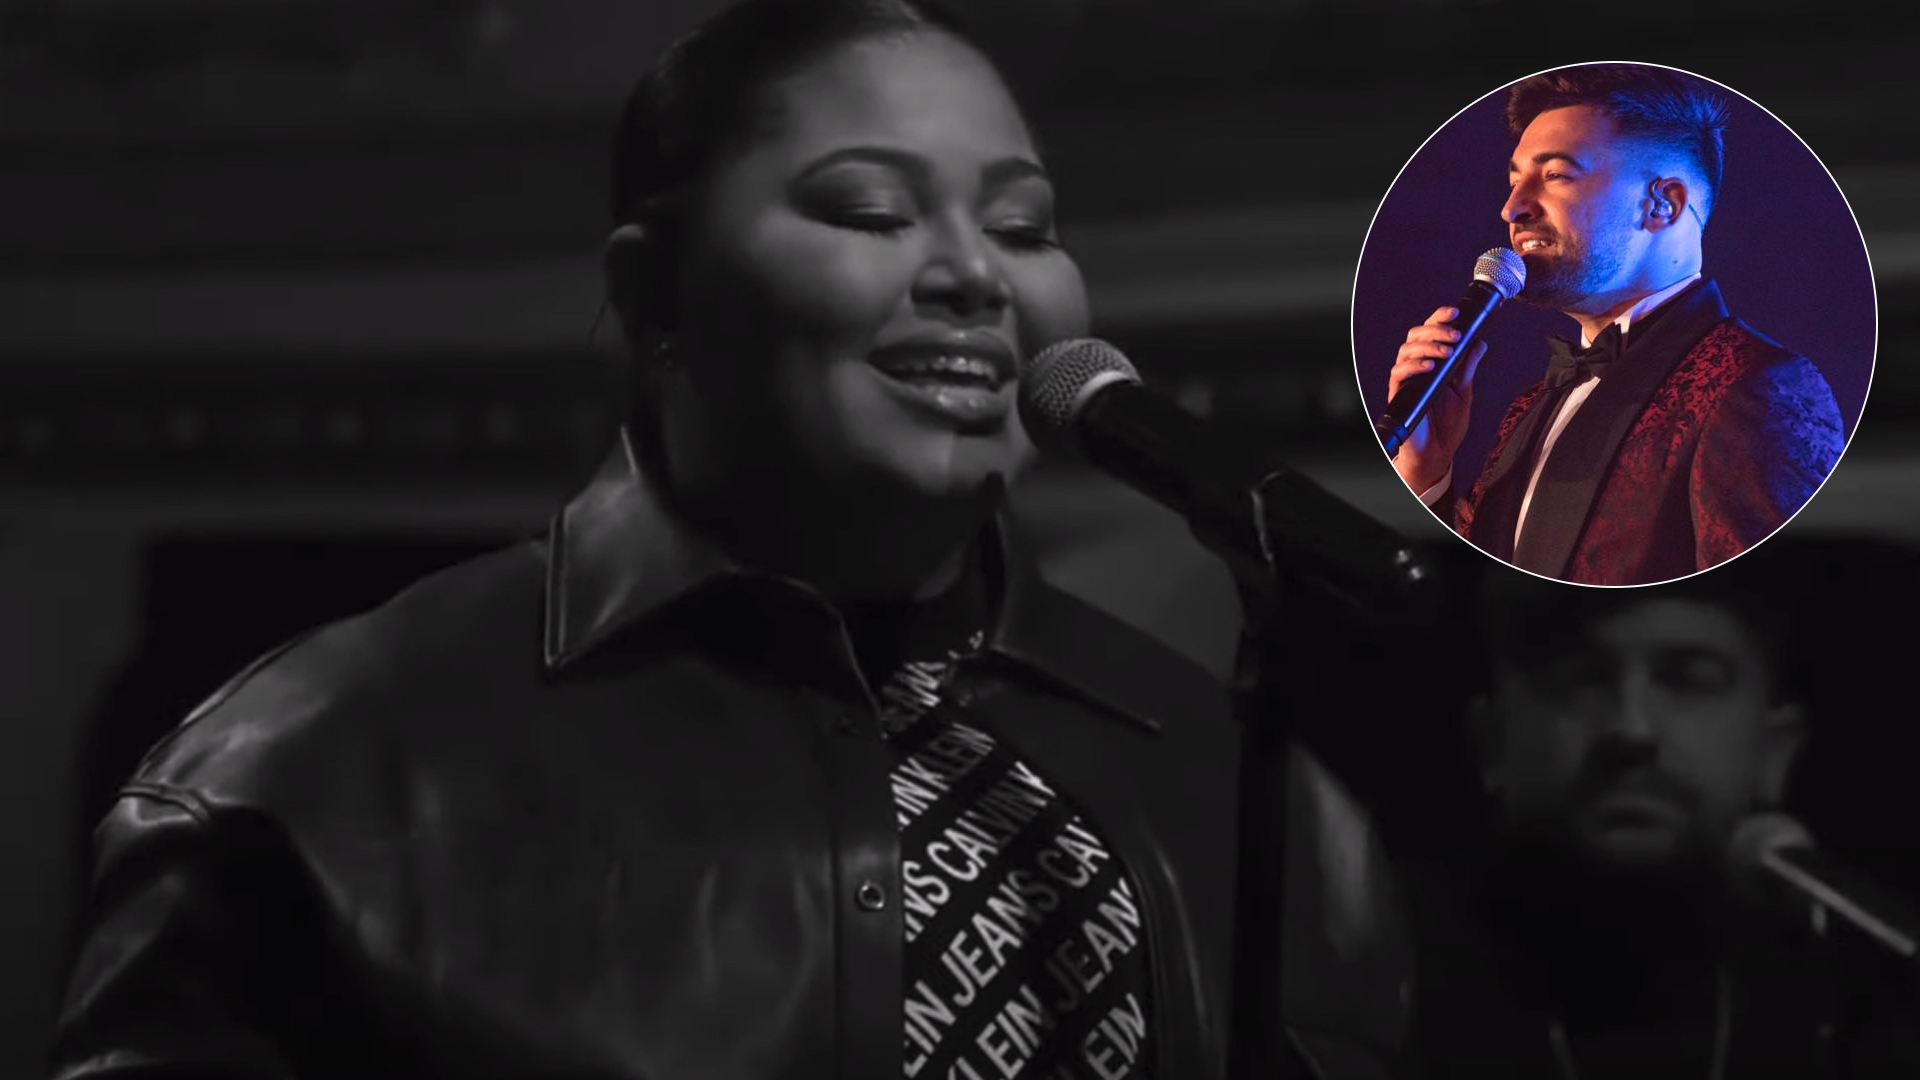 Destiny’s ‘Je Me Casse’ in a new acoustic version with Kevin Paul Calleja